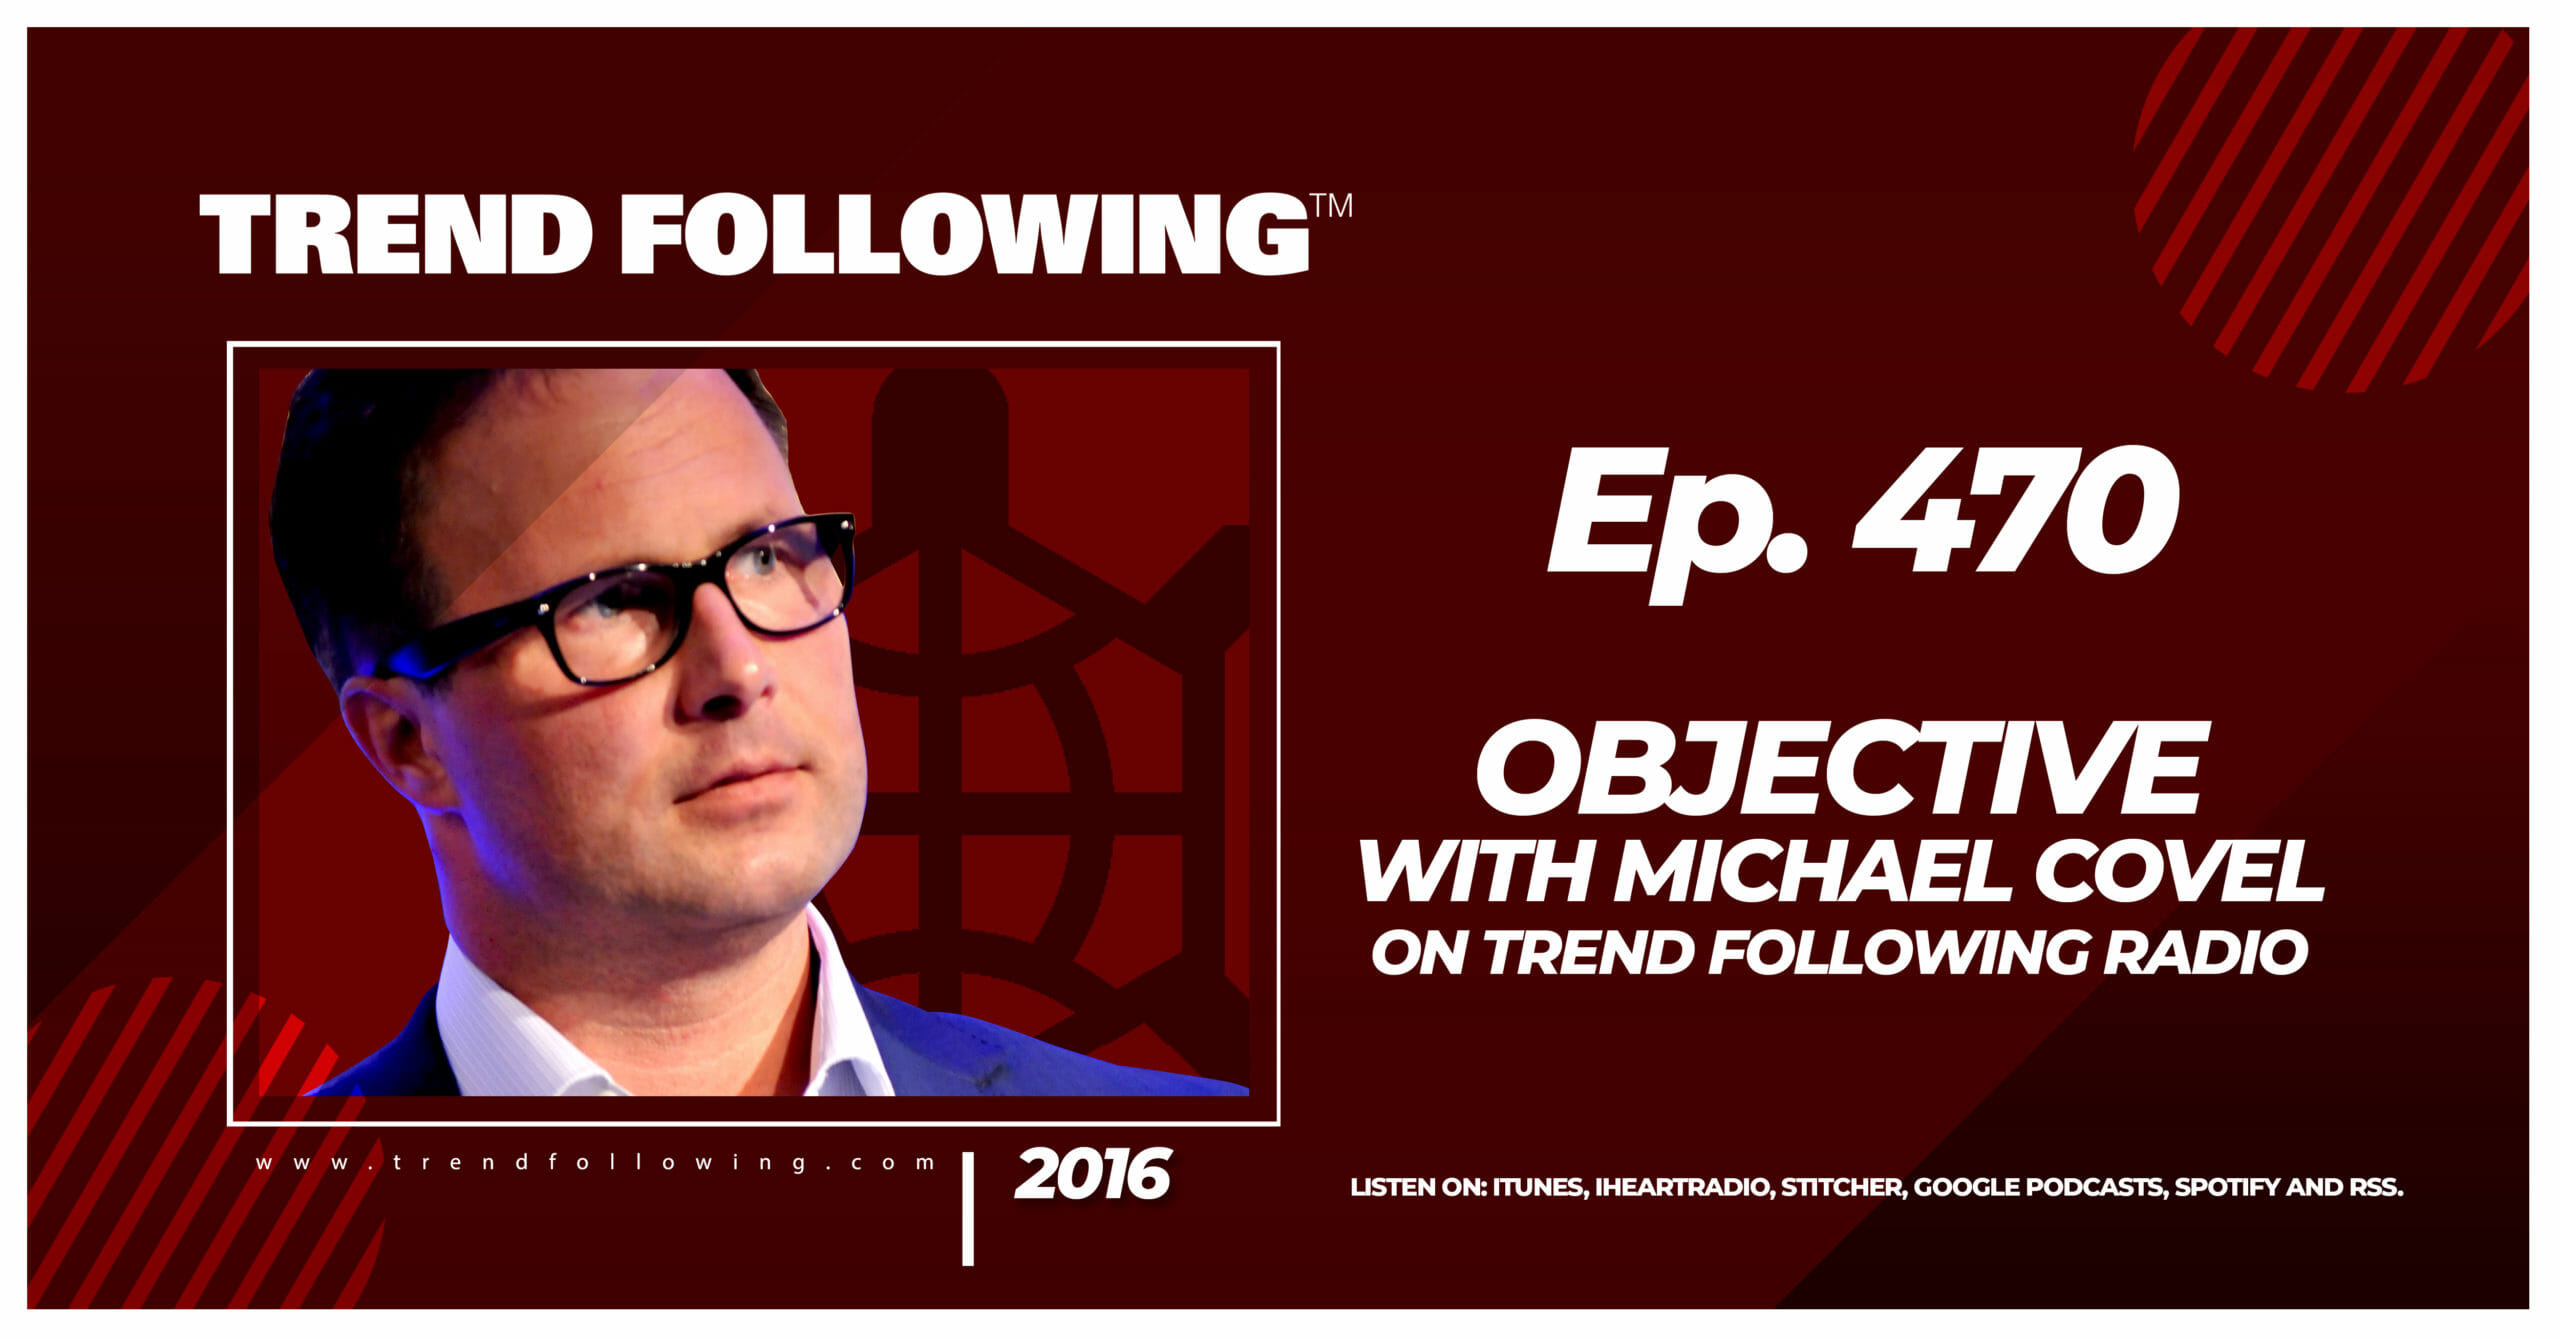 Objective with Michael Covel on Trend Following Radio